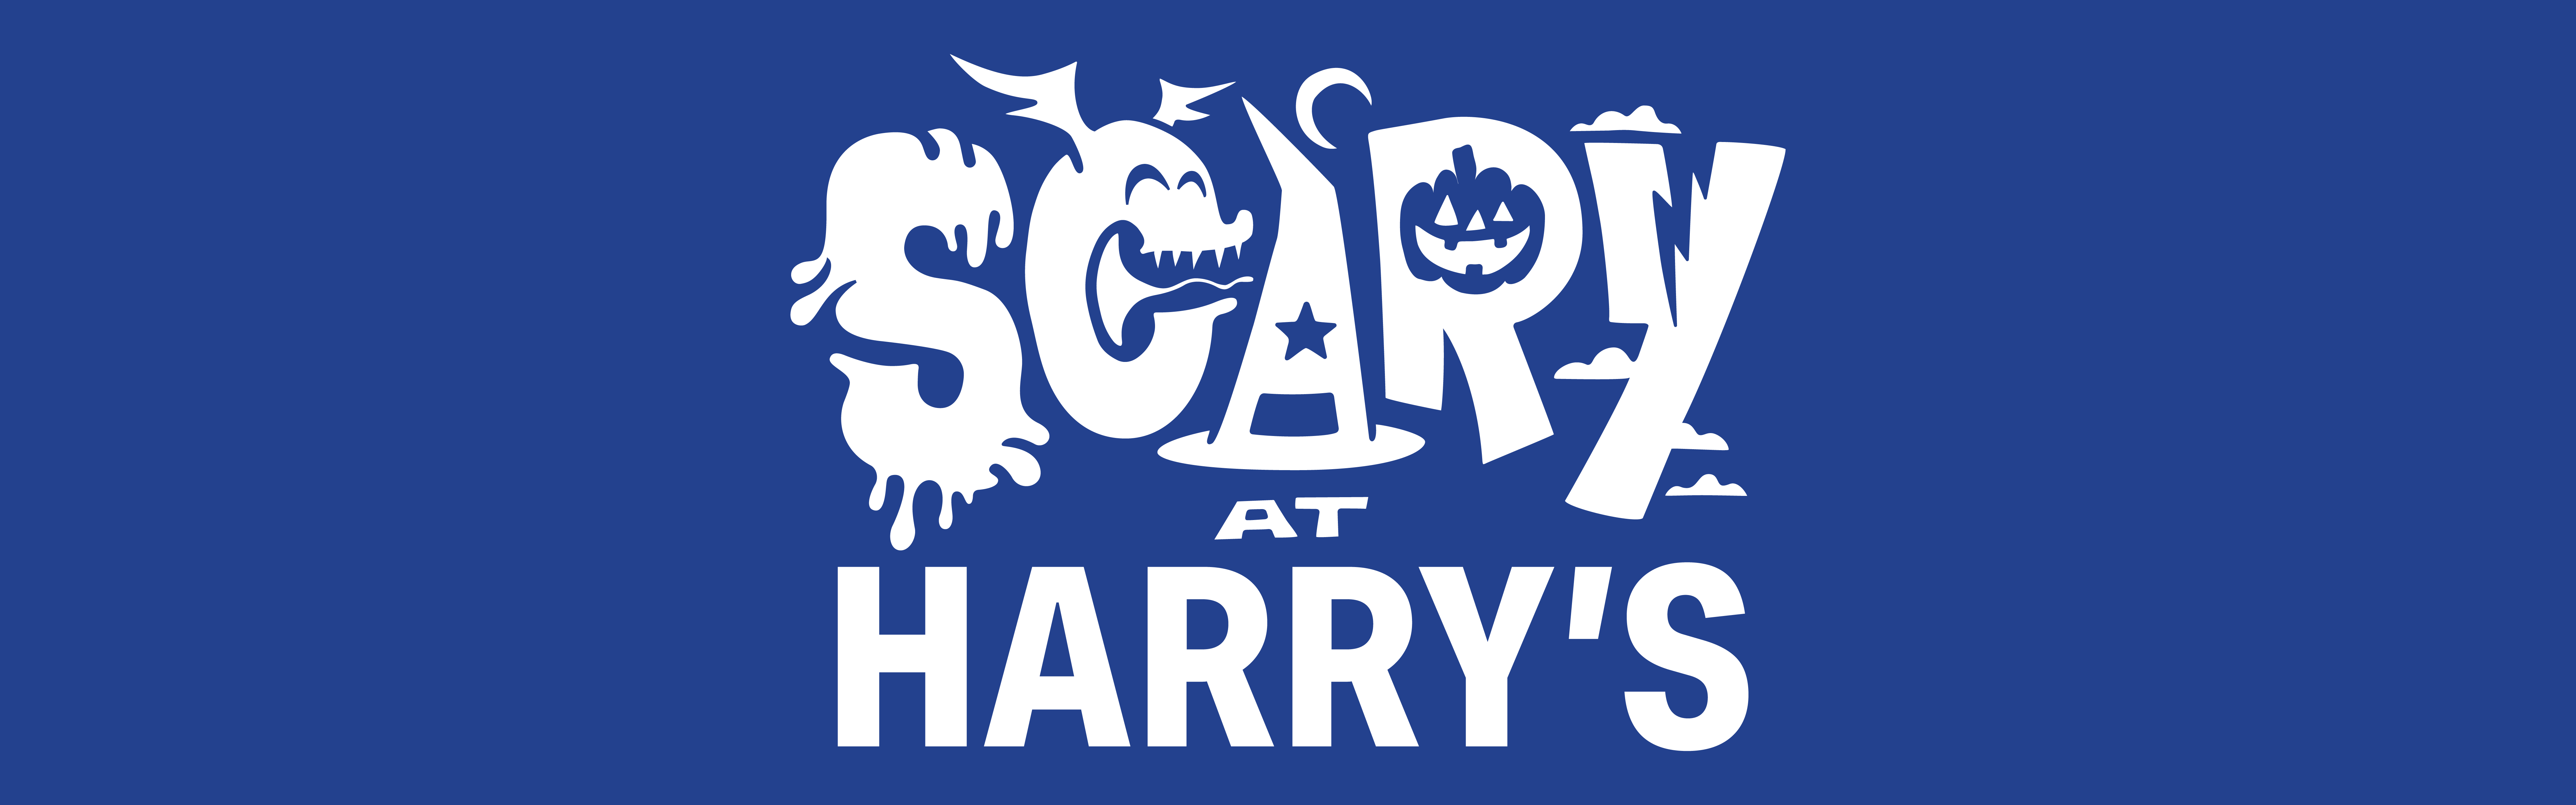 The Scary at Harry's